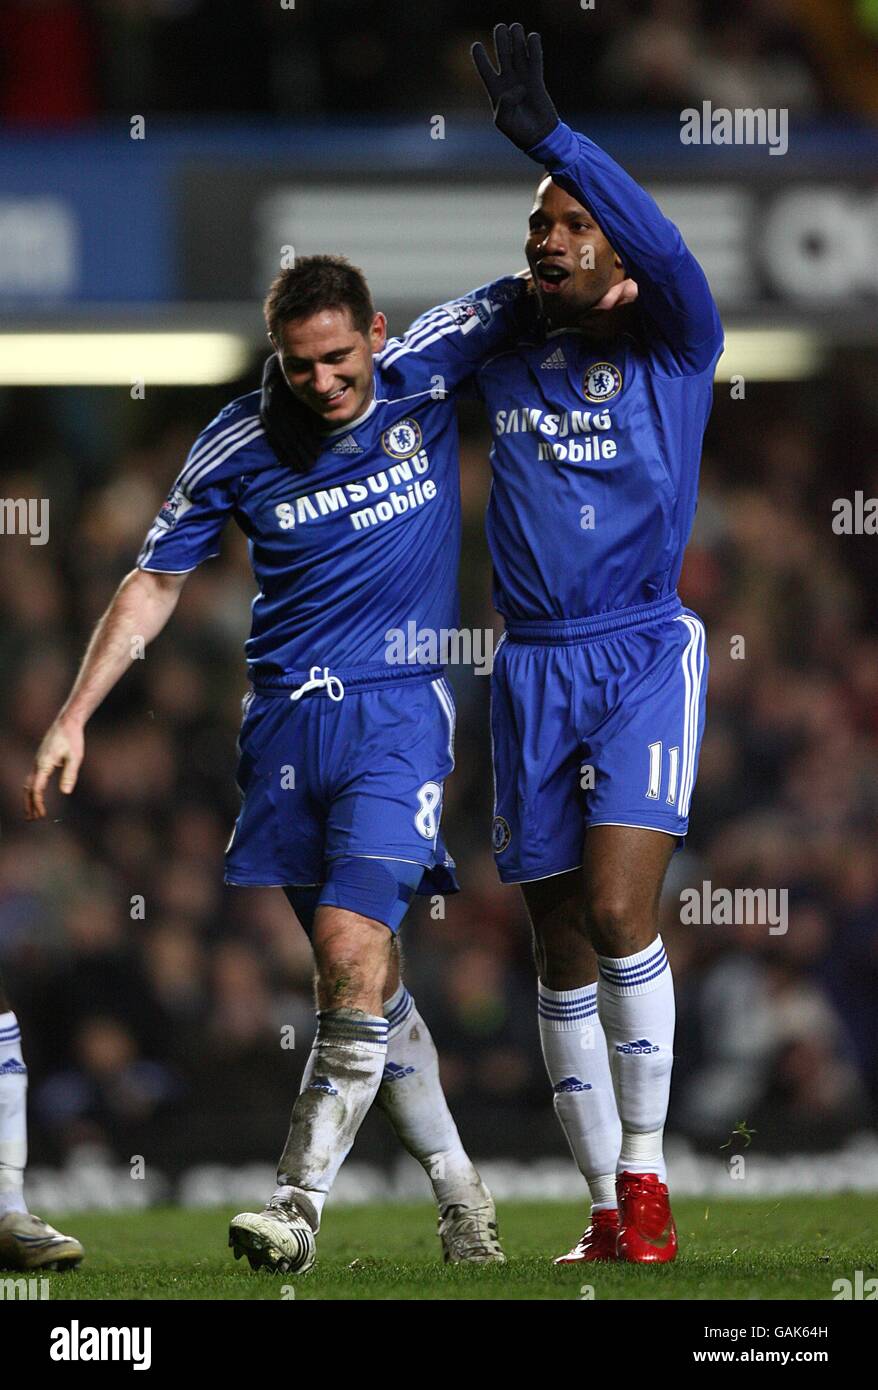 Soccer - Barclays Premier League - Chelsea v Derby - Stamford Bridge. Chelsea's Frank Lampard (left) celebrates with team mate Didier Drogba after scoring the sixth goal goal of the game. Stock Photo